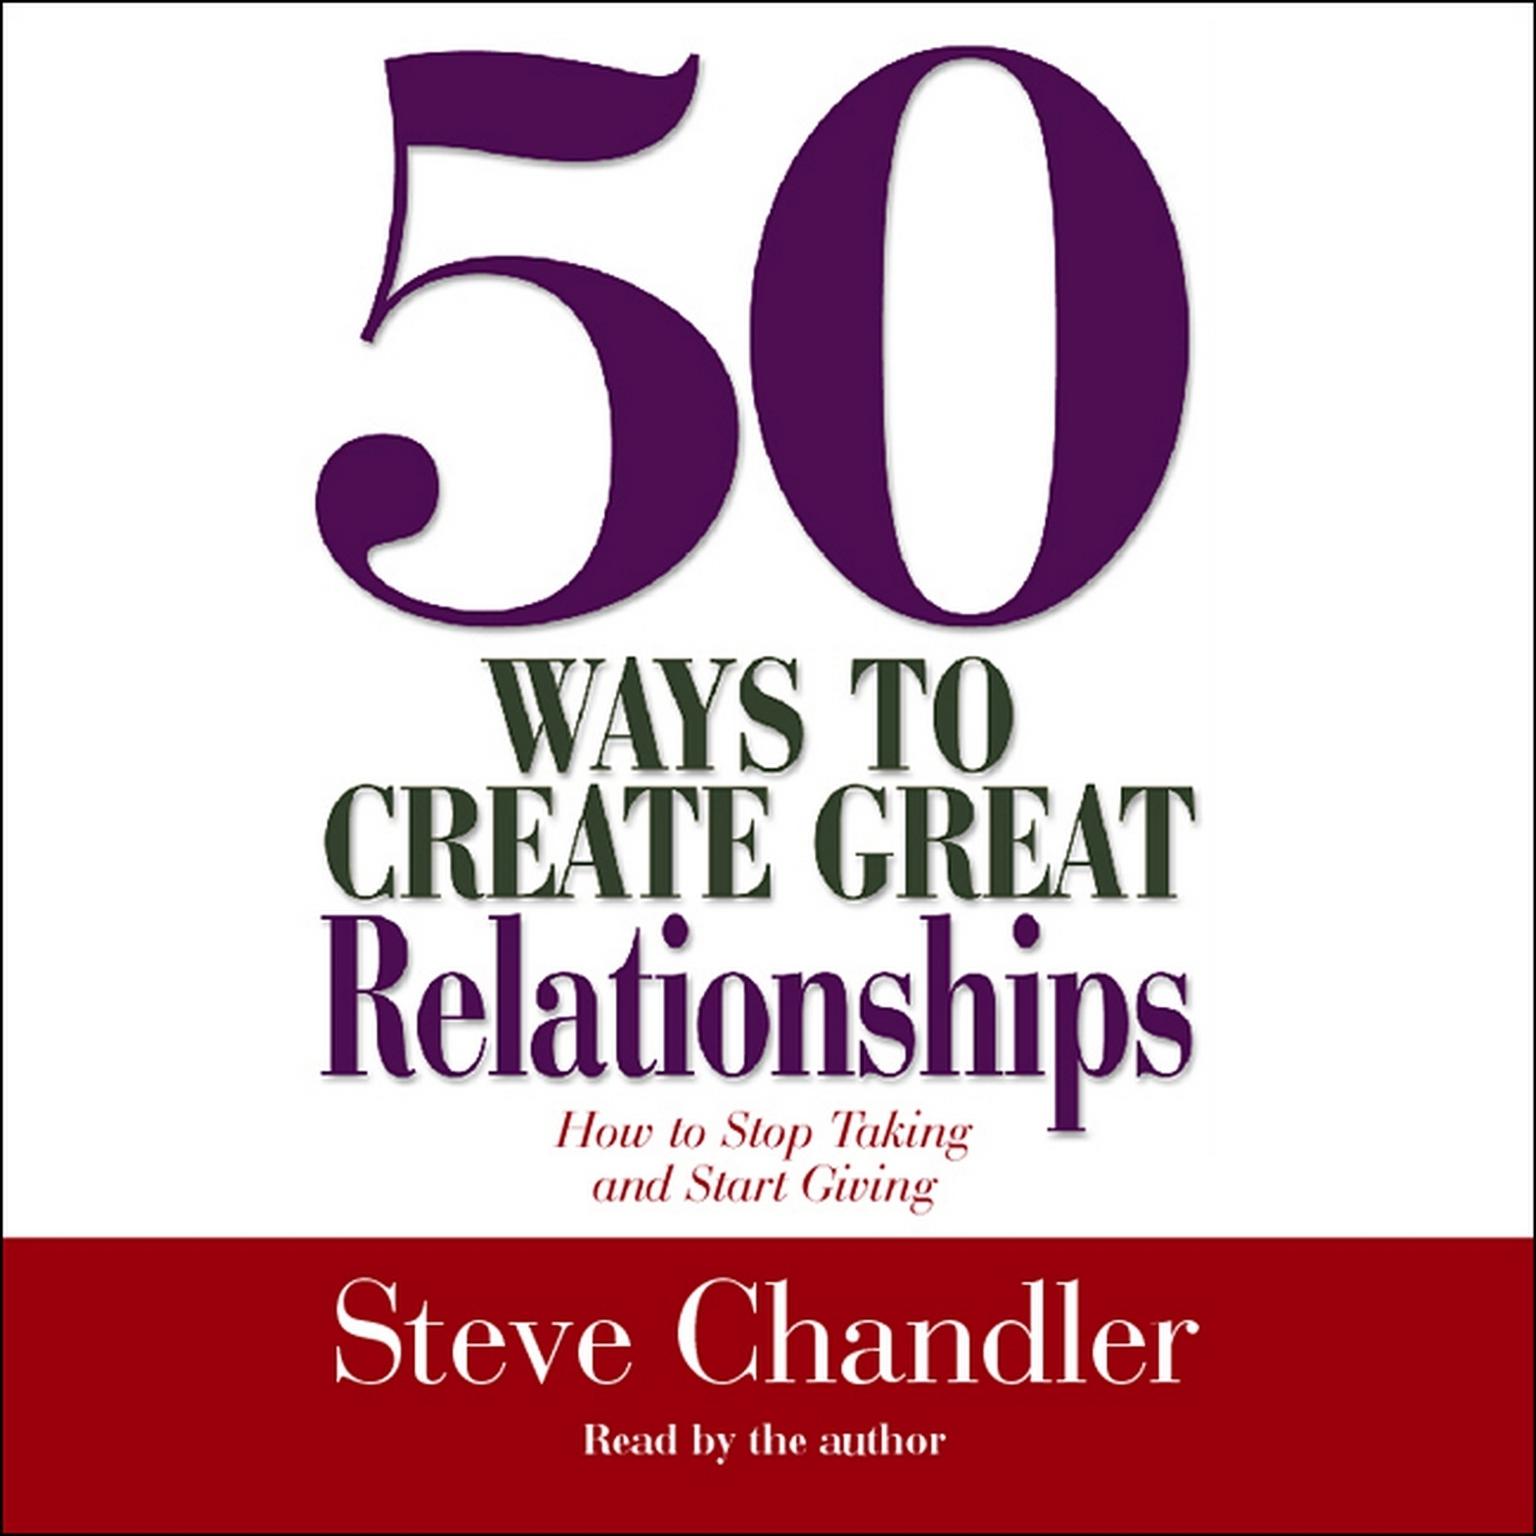 50 Ways to Create Great Relationships (Abridged): How to Stop Taking and Start Giving Audiobook, by Steve Chandler